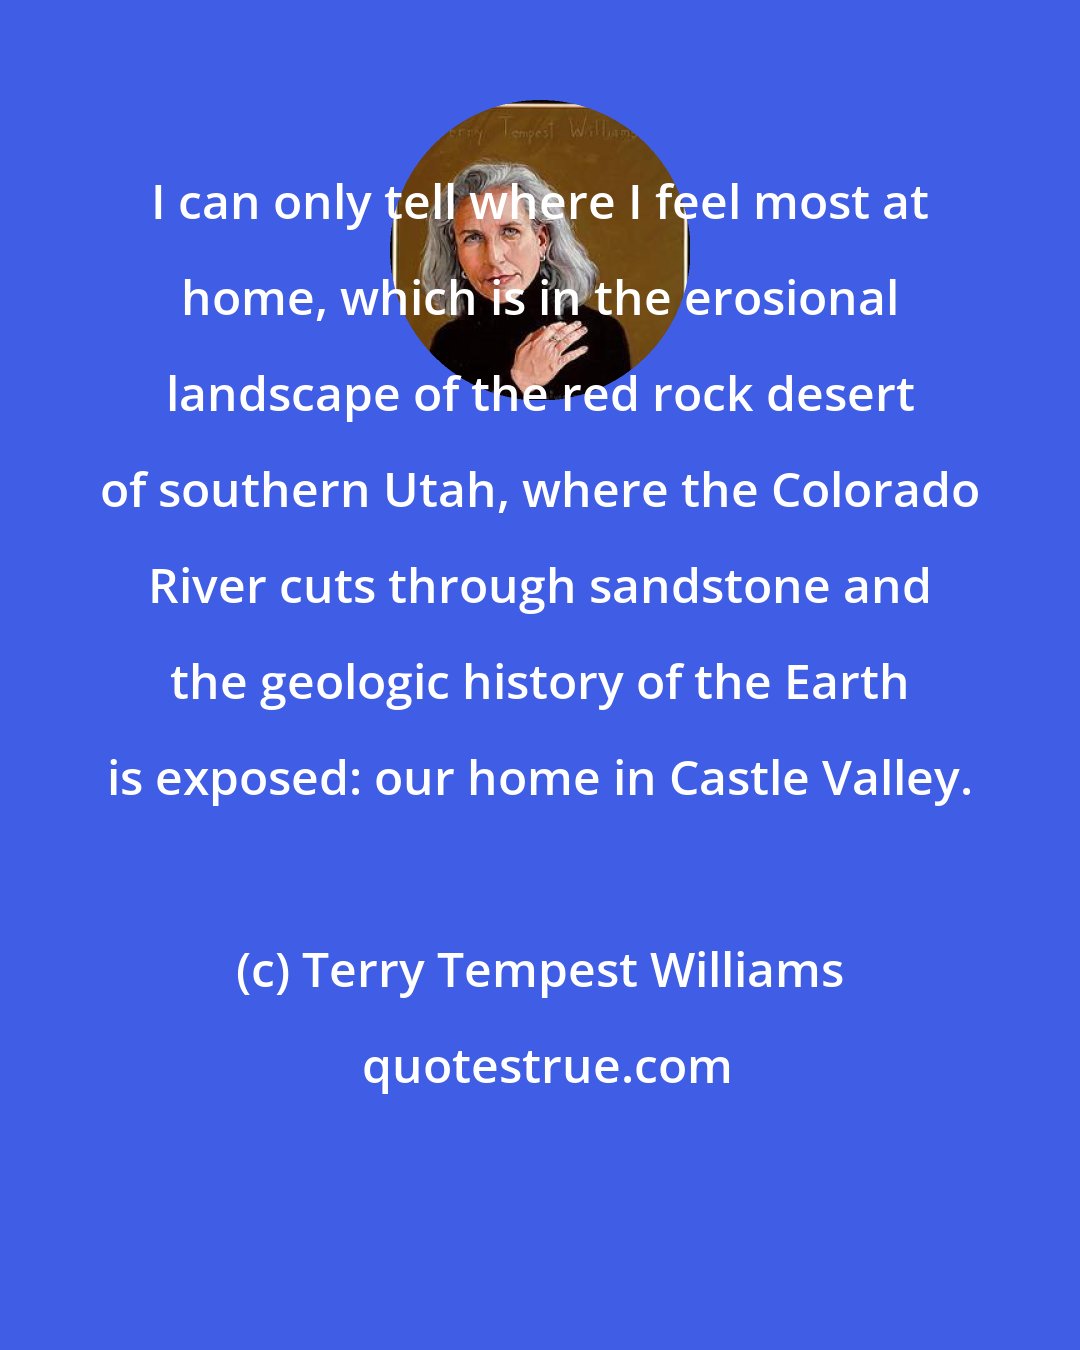 Terry Tempest Williams: I can only tell where I feel most at home, which is in the erosional landscape of the red rock desert of southern Utah, where the Colorado River cuts through sandstone and the geologic history of the Earth is exposed: our home in Castle Valley.